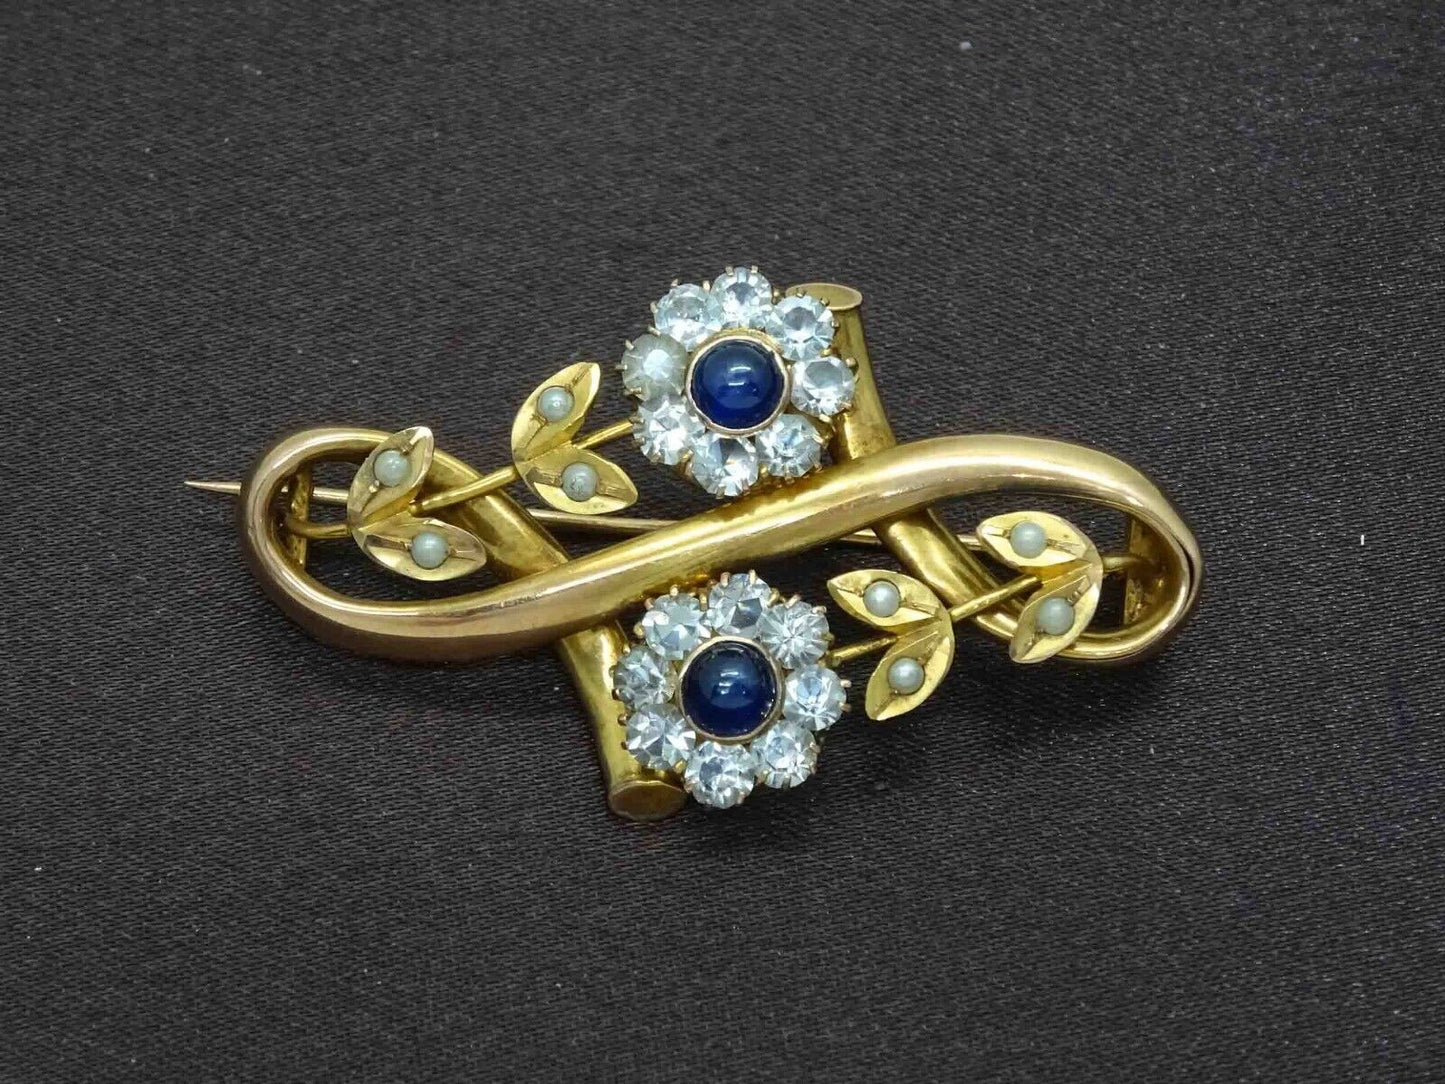 Antique EROV Sapphire & Seed Pearl & Crystal Floral Brooch Pin 14k Gold